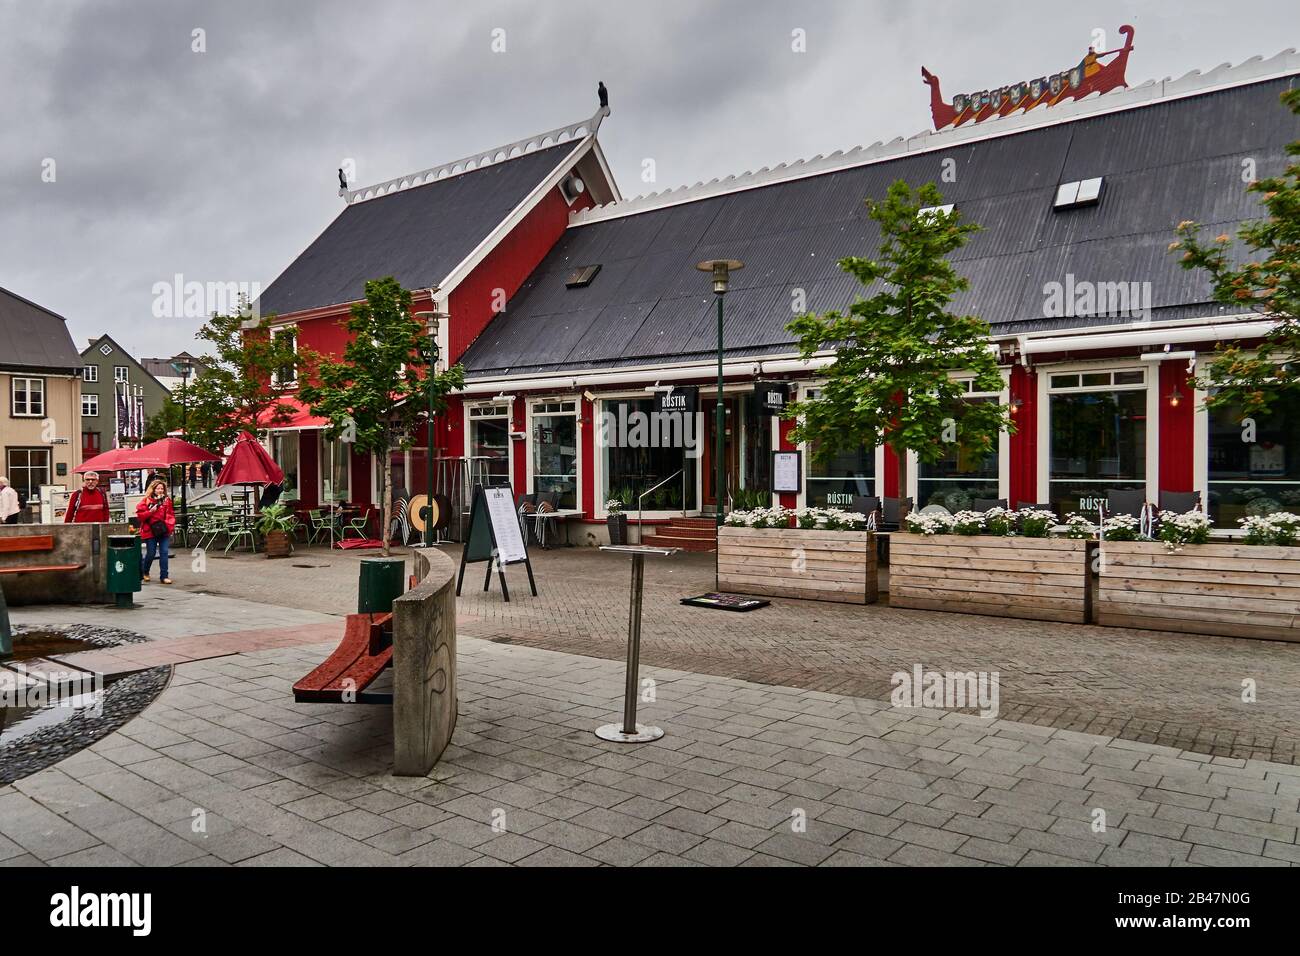 Europe , Reykjavik, Iceland., Ingolfstorg square, long red house topped with a longship and 4 statues of hawks, shops and restaurants during a rainy day in the summer Stock Photo